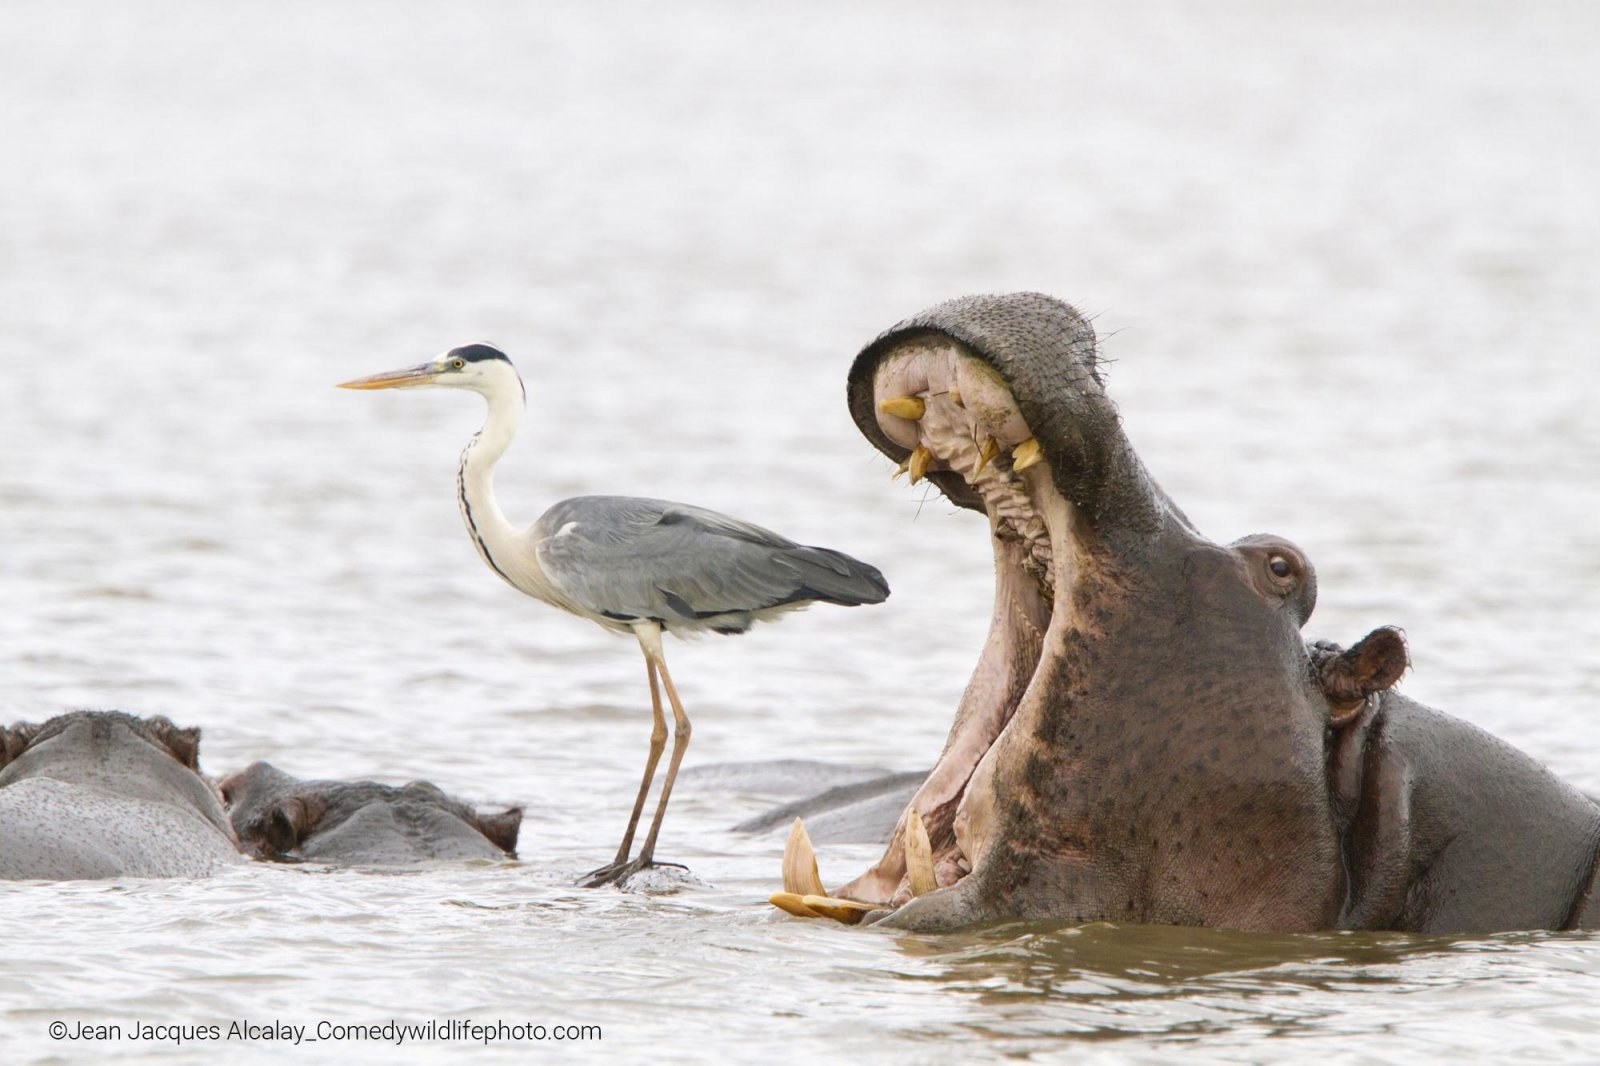 Hippo yawning mouth opened wide next to a heron standing on the back of another hippo.